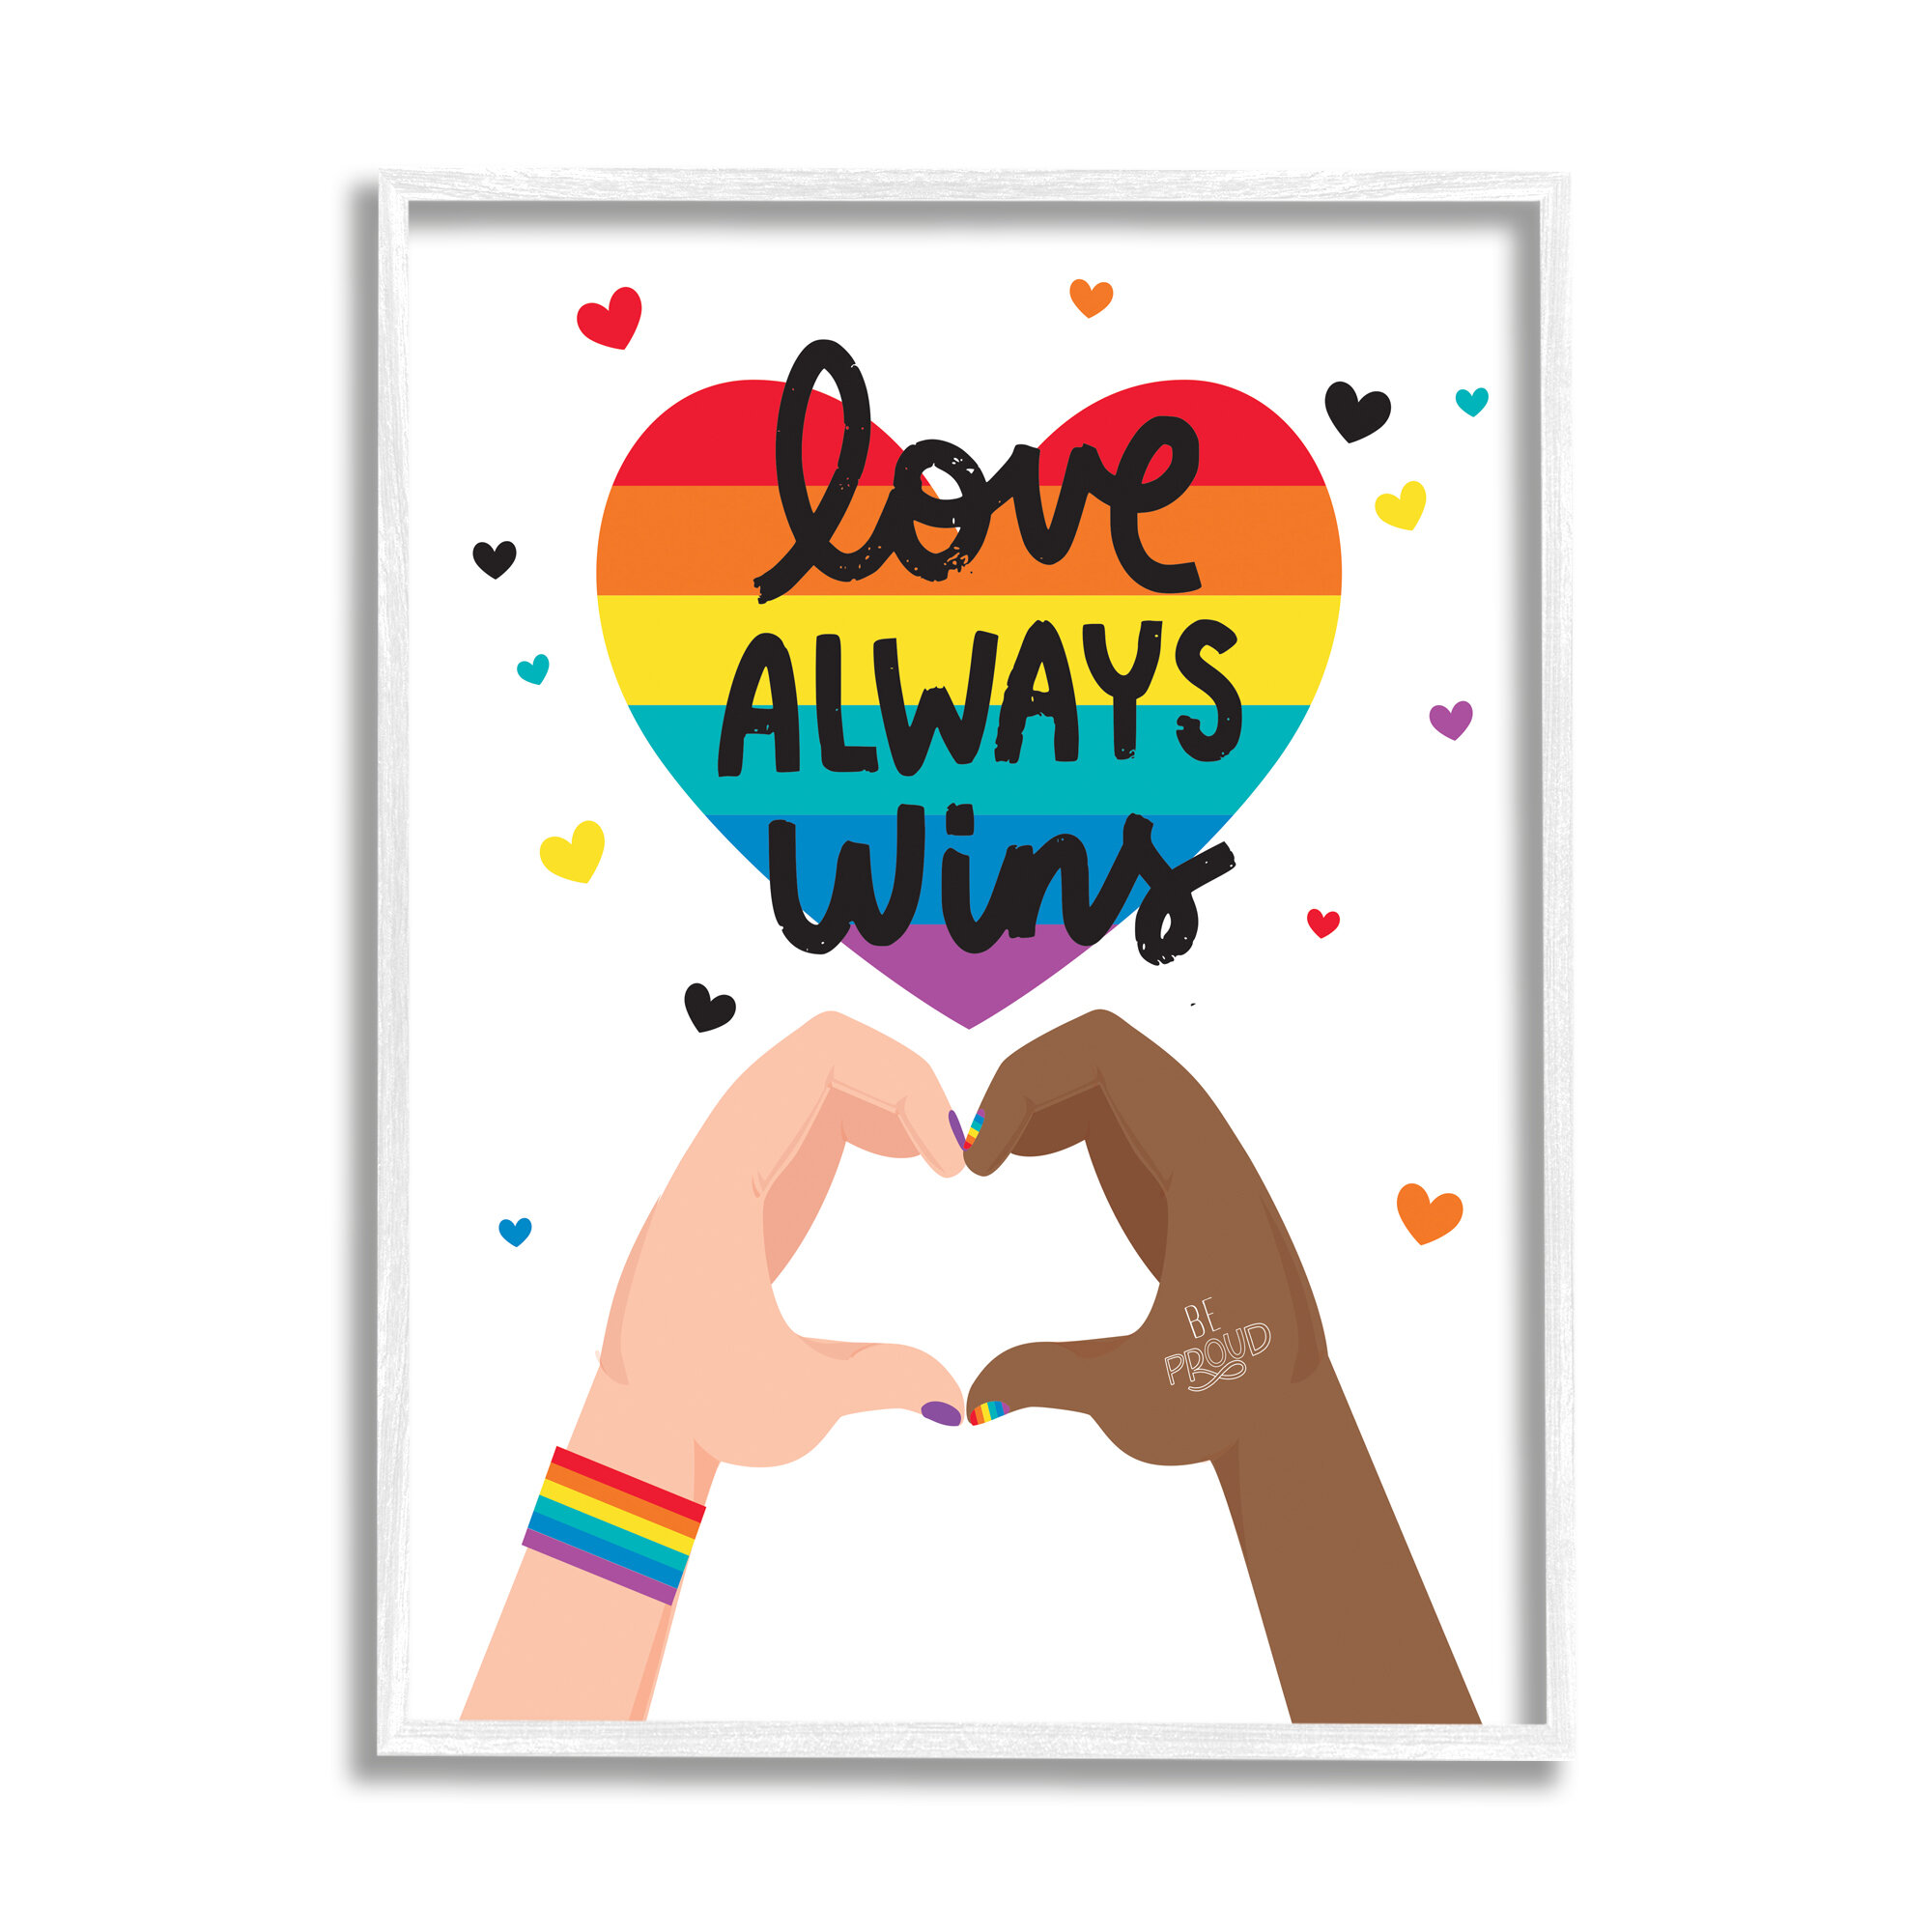 Hand Gesture Love Symbol Selflove Heart Design For Printing Greeting Cards  Banners Posters Stock Illustration - Download Image Now - iStock